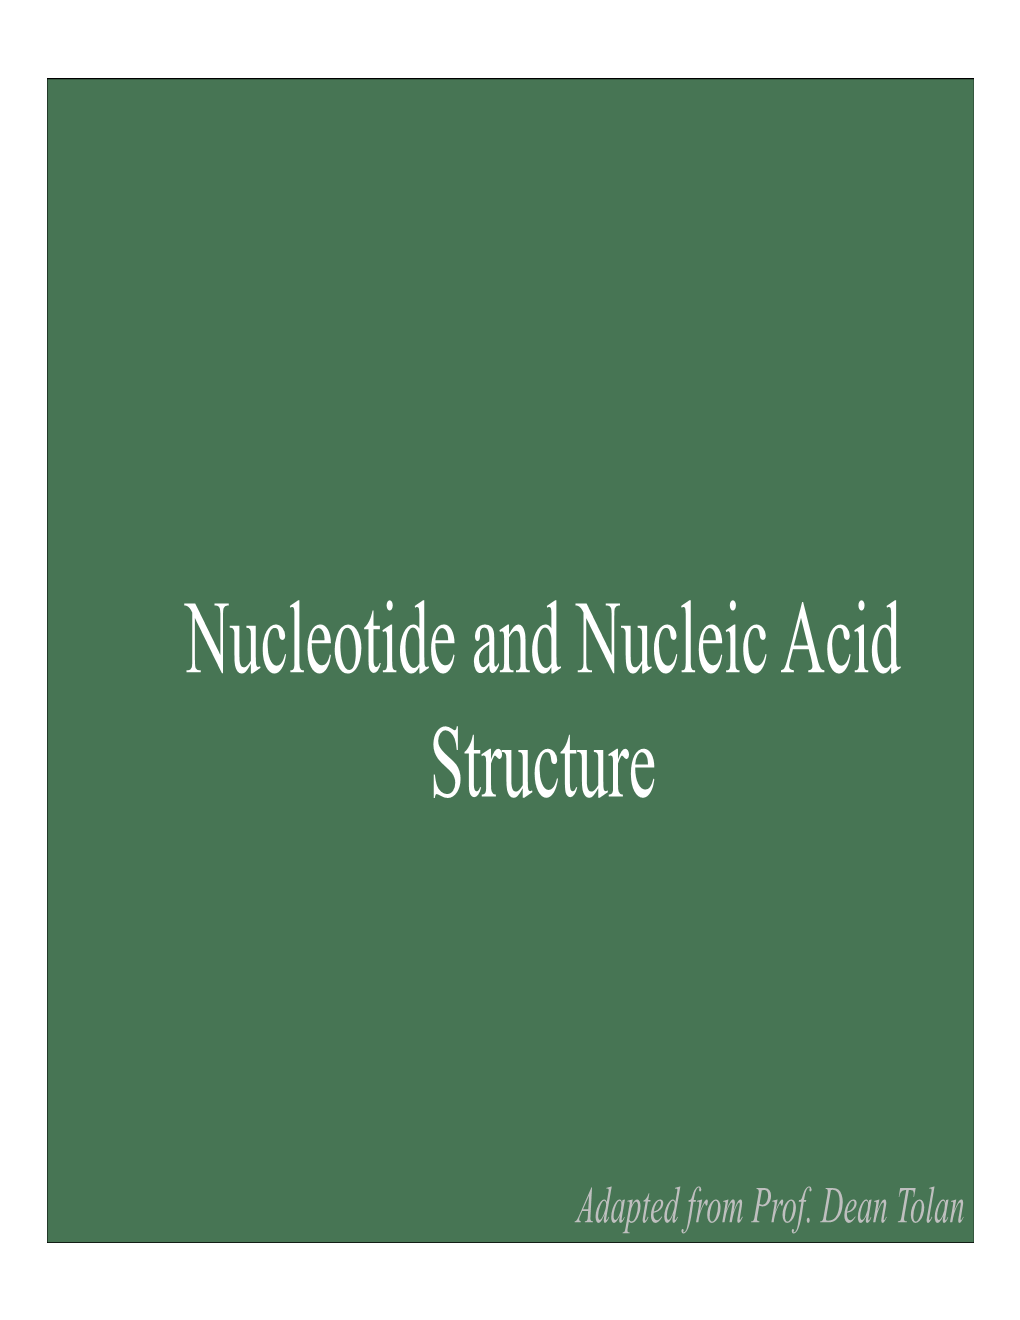 Nucleotide and Nucleic Acid Structure